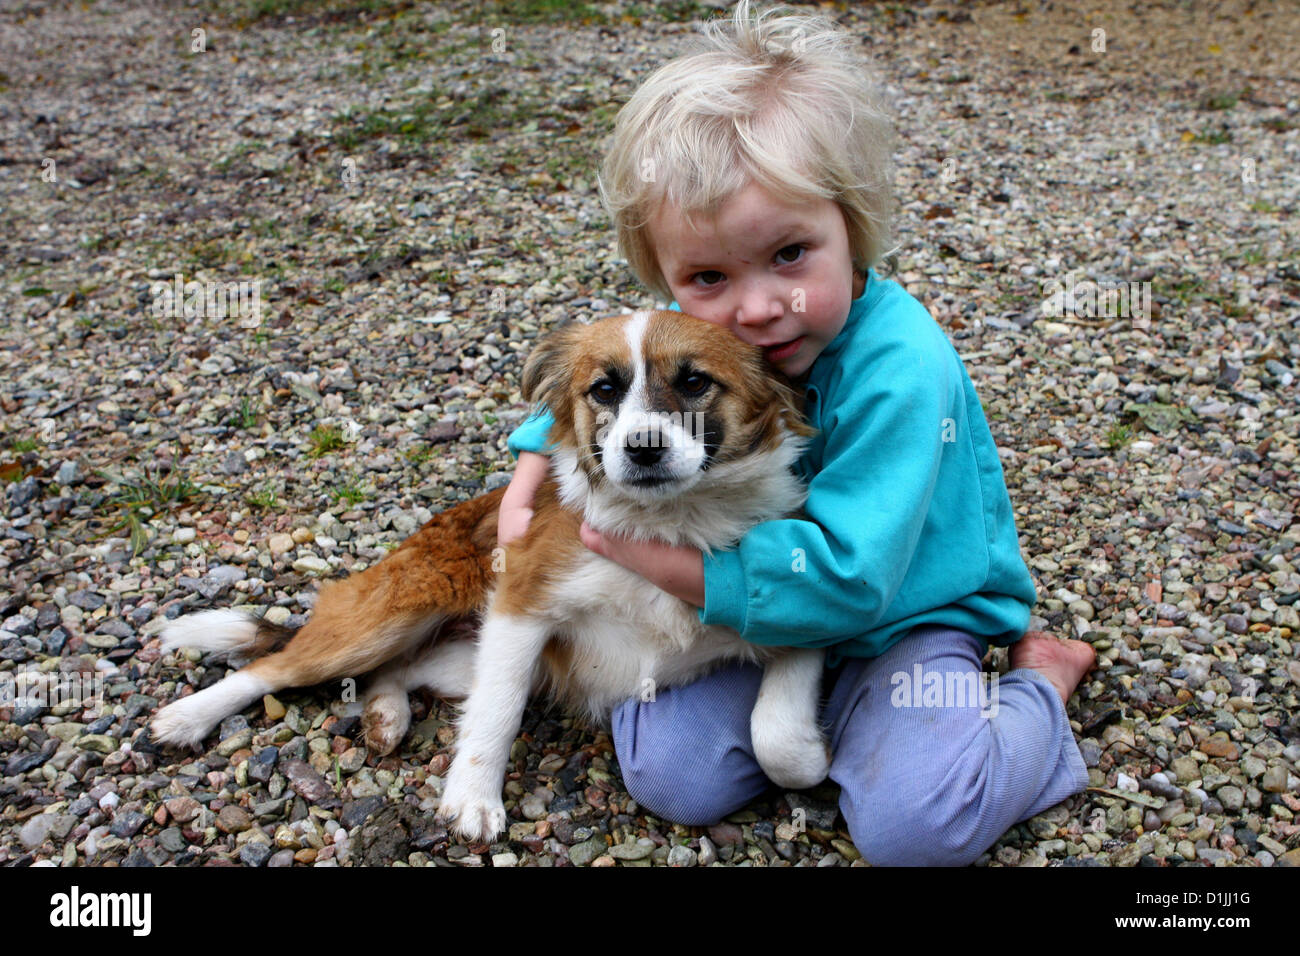 Child and dog friendship dog looking at the camera, child dog hug A child lovingly hugs his dog toddler alone Stock Photo